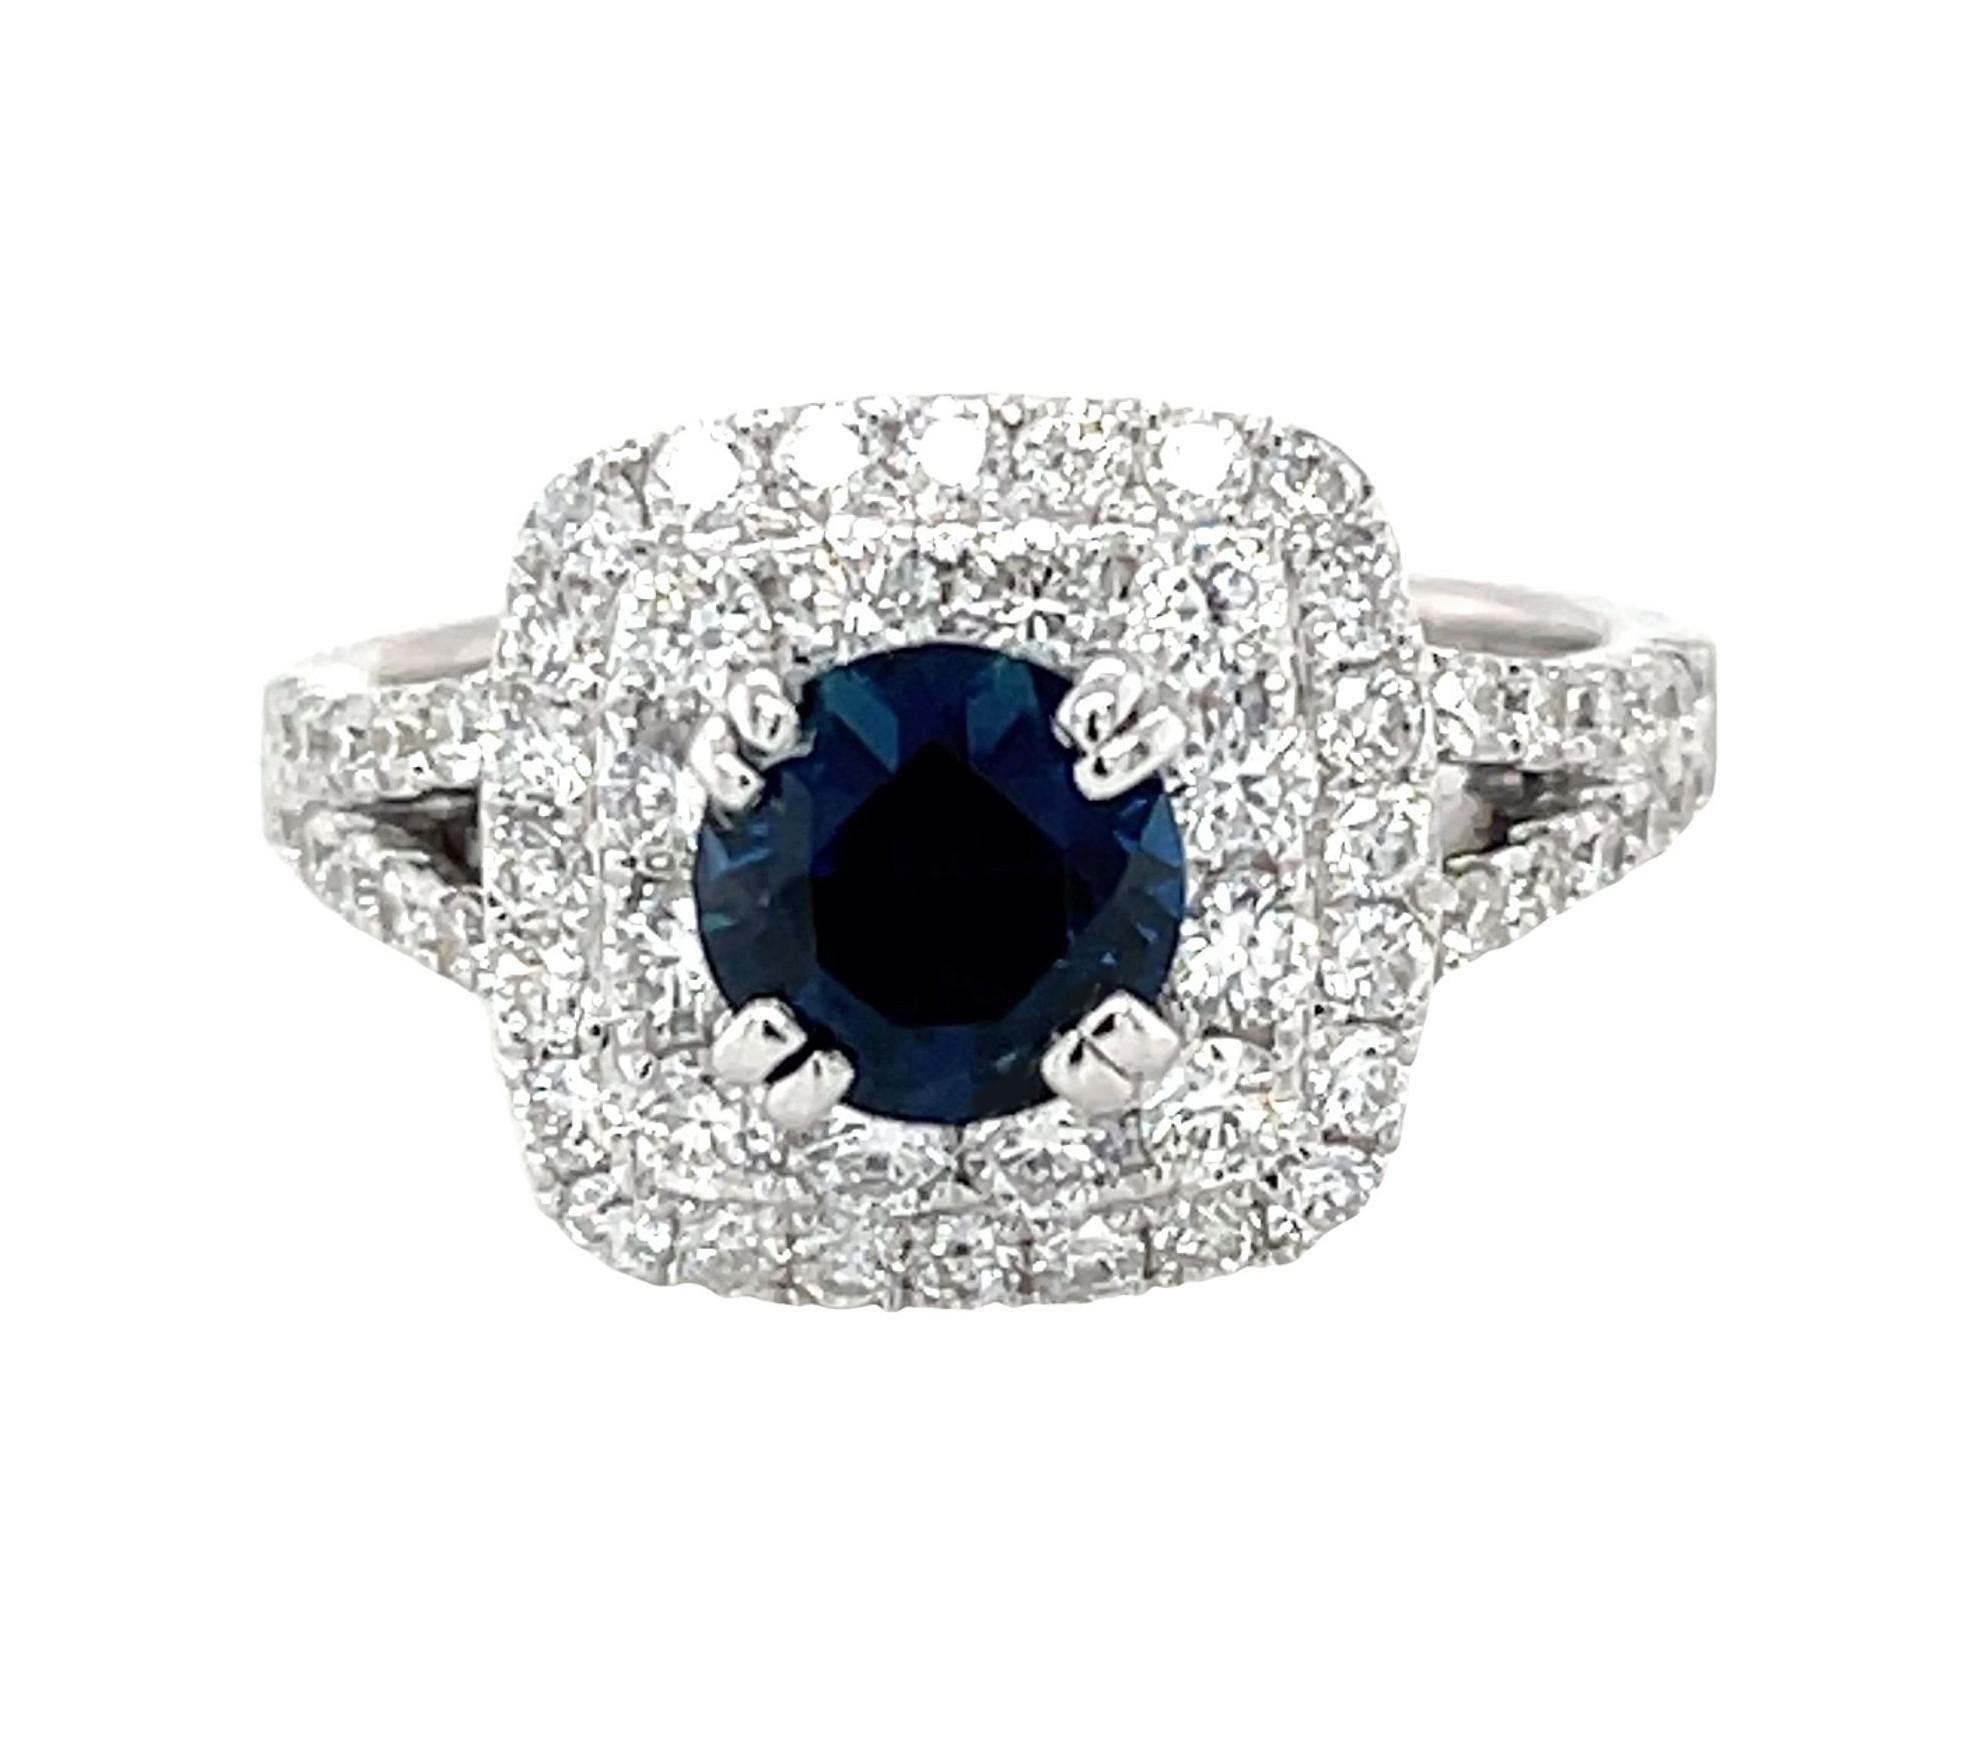 This beautiful cocktail ring features a gorgeous 1.15 carat round blue sapphire framed by a double halo of sparking diamonds! The brilliant white diamonds continue down each side of the elegant split shank of this stunning 18k white gold ring. Blue